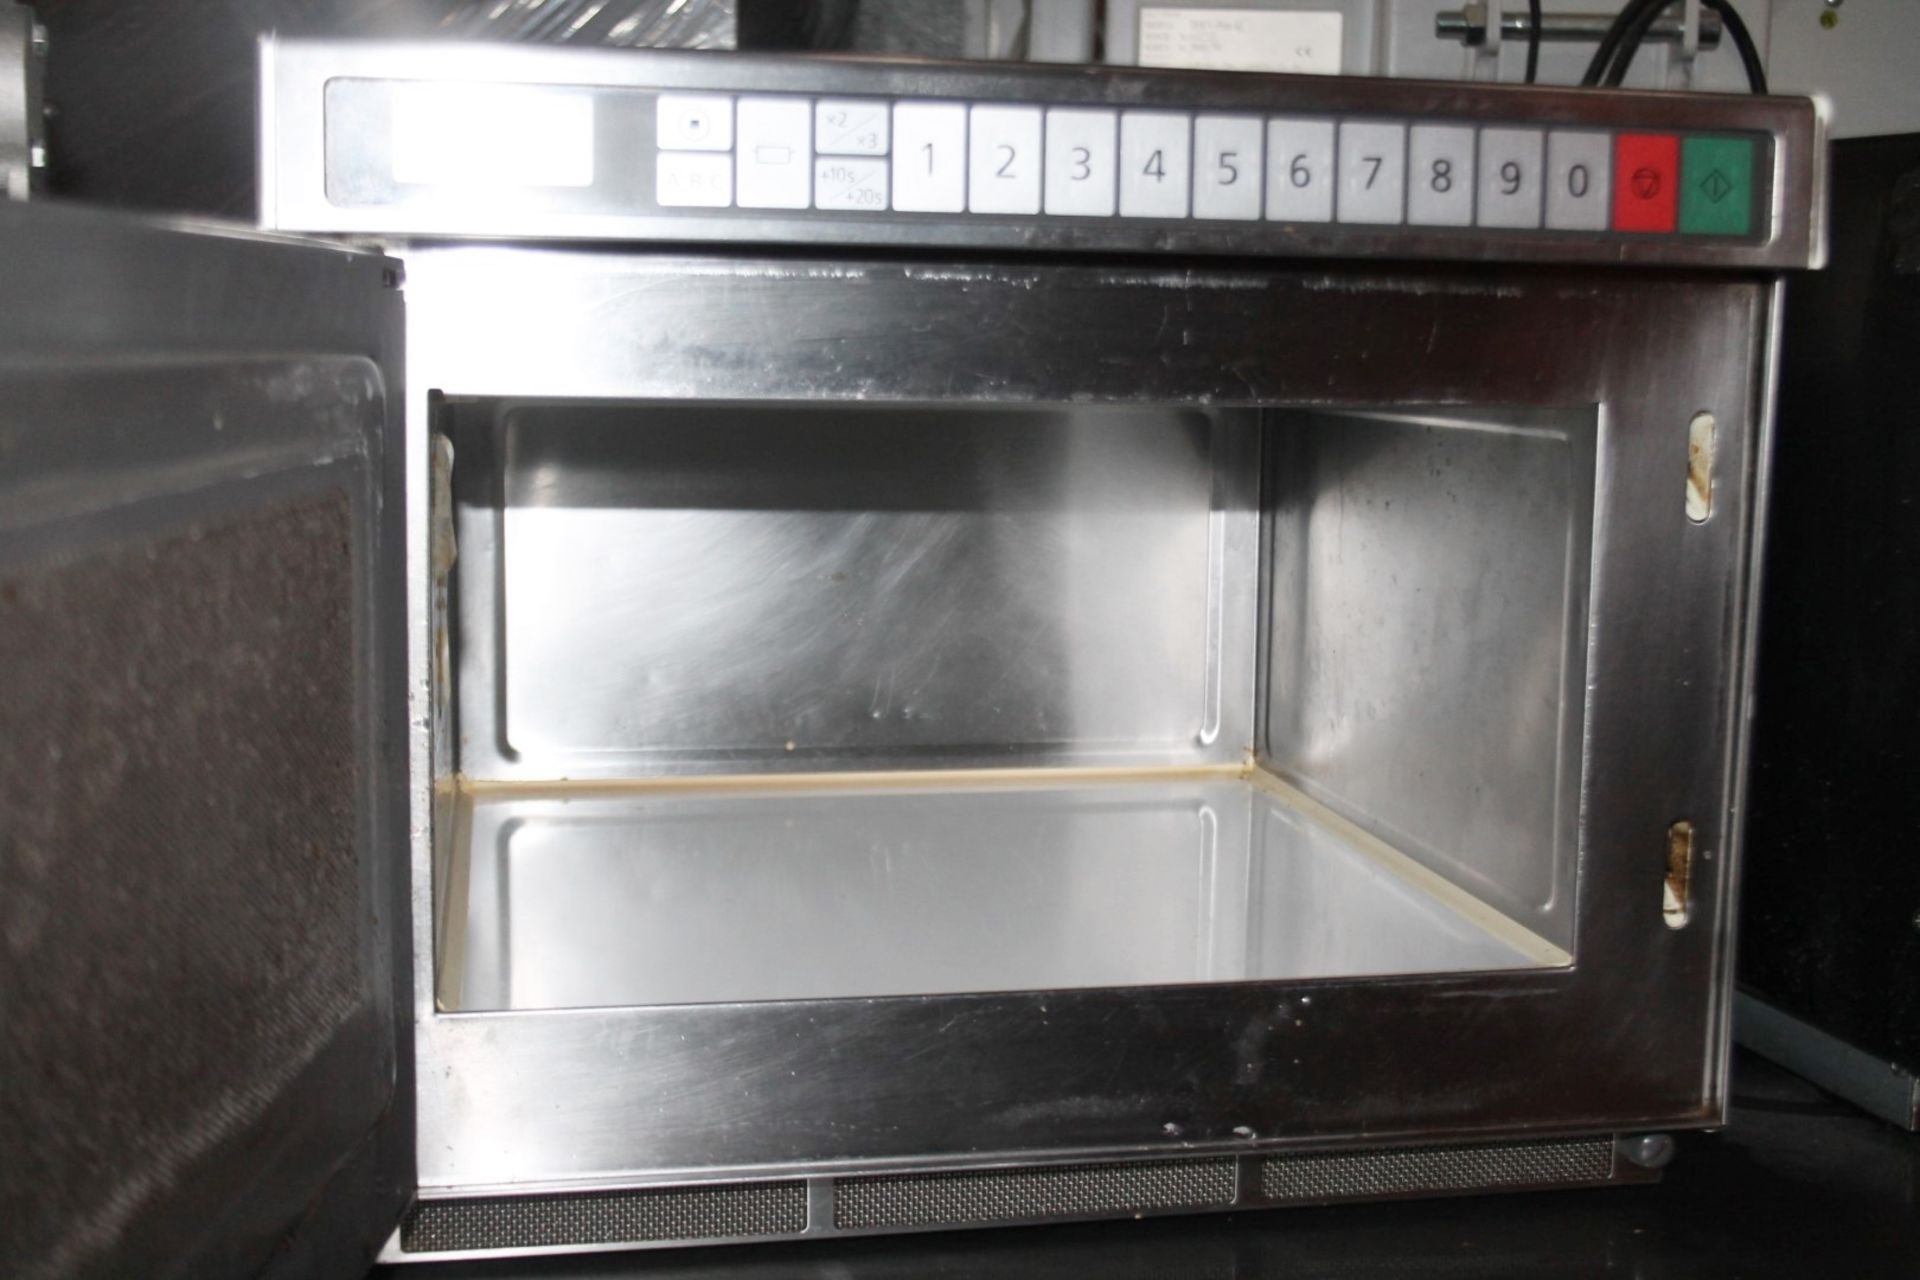 1 x Panasonic Commercial Microwave Oven Featuring A Stainless Steel Exterior And 'Microsave' - Image 3 of 7